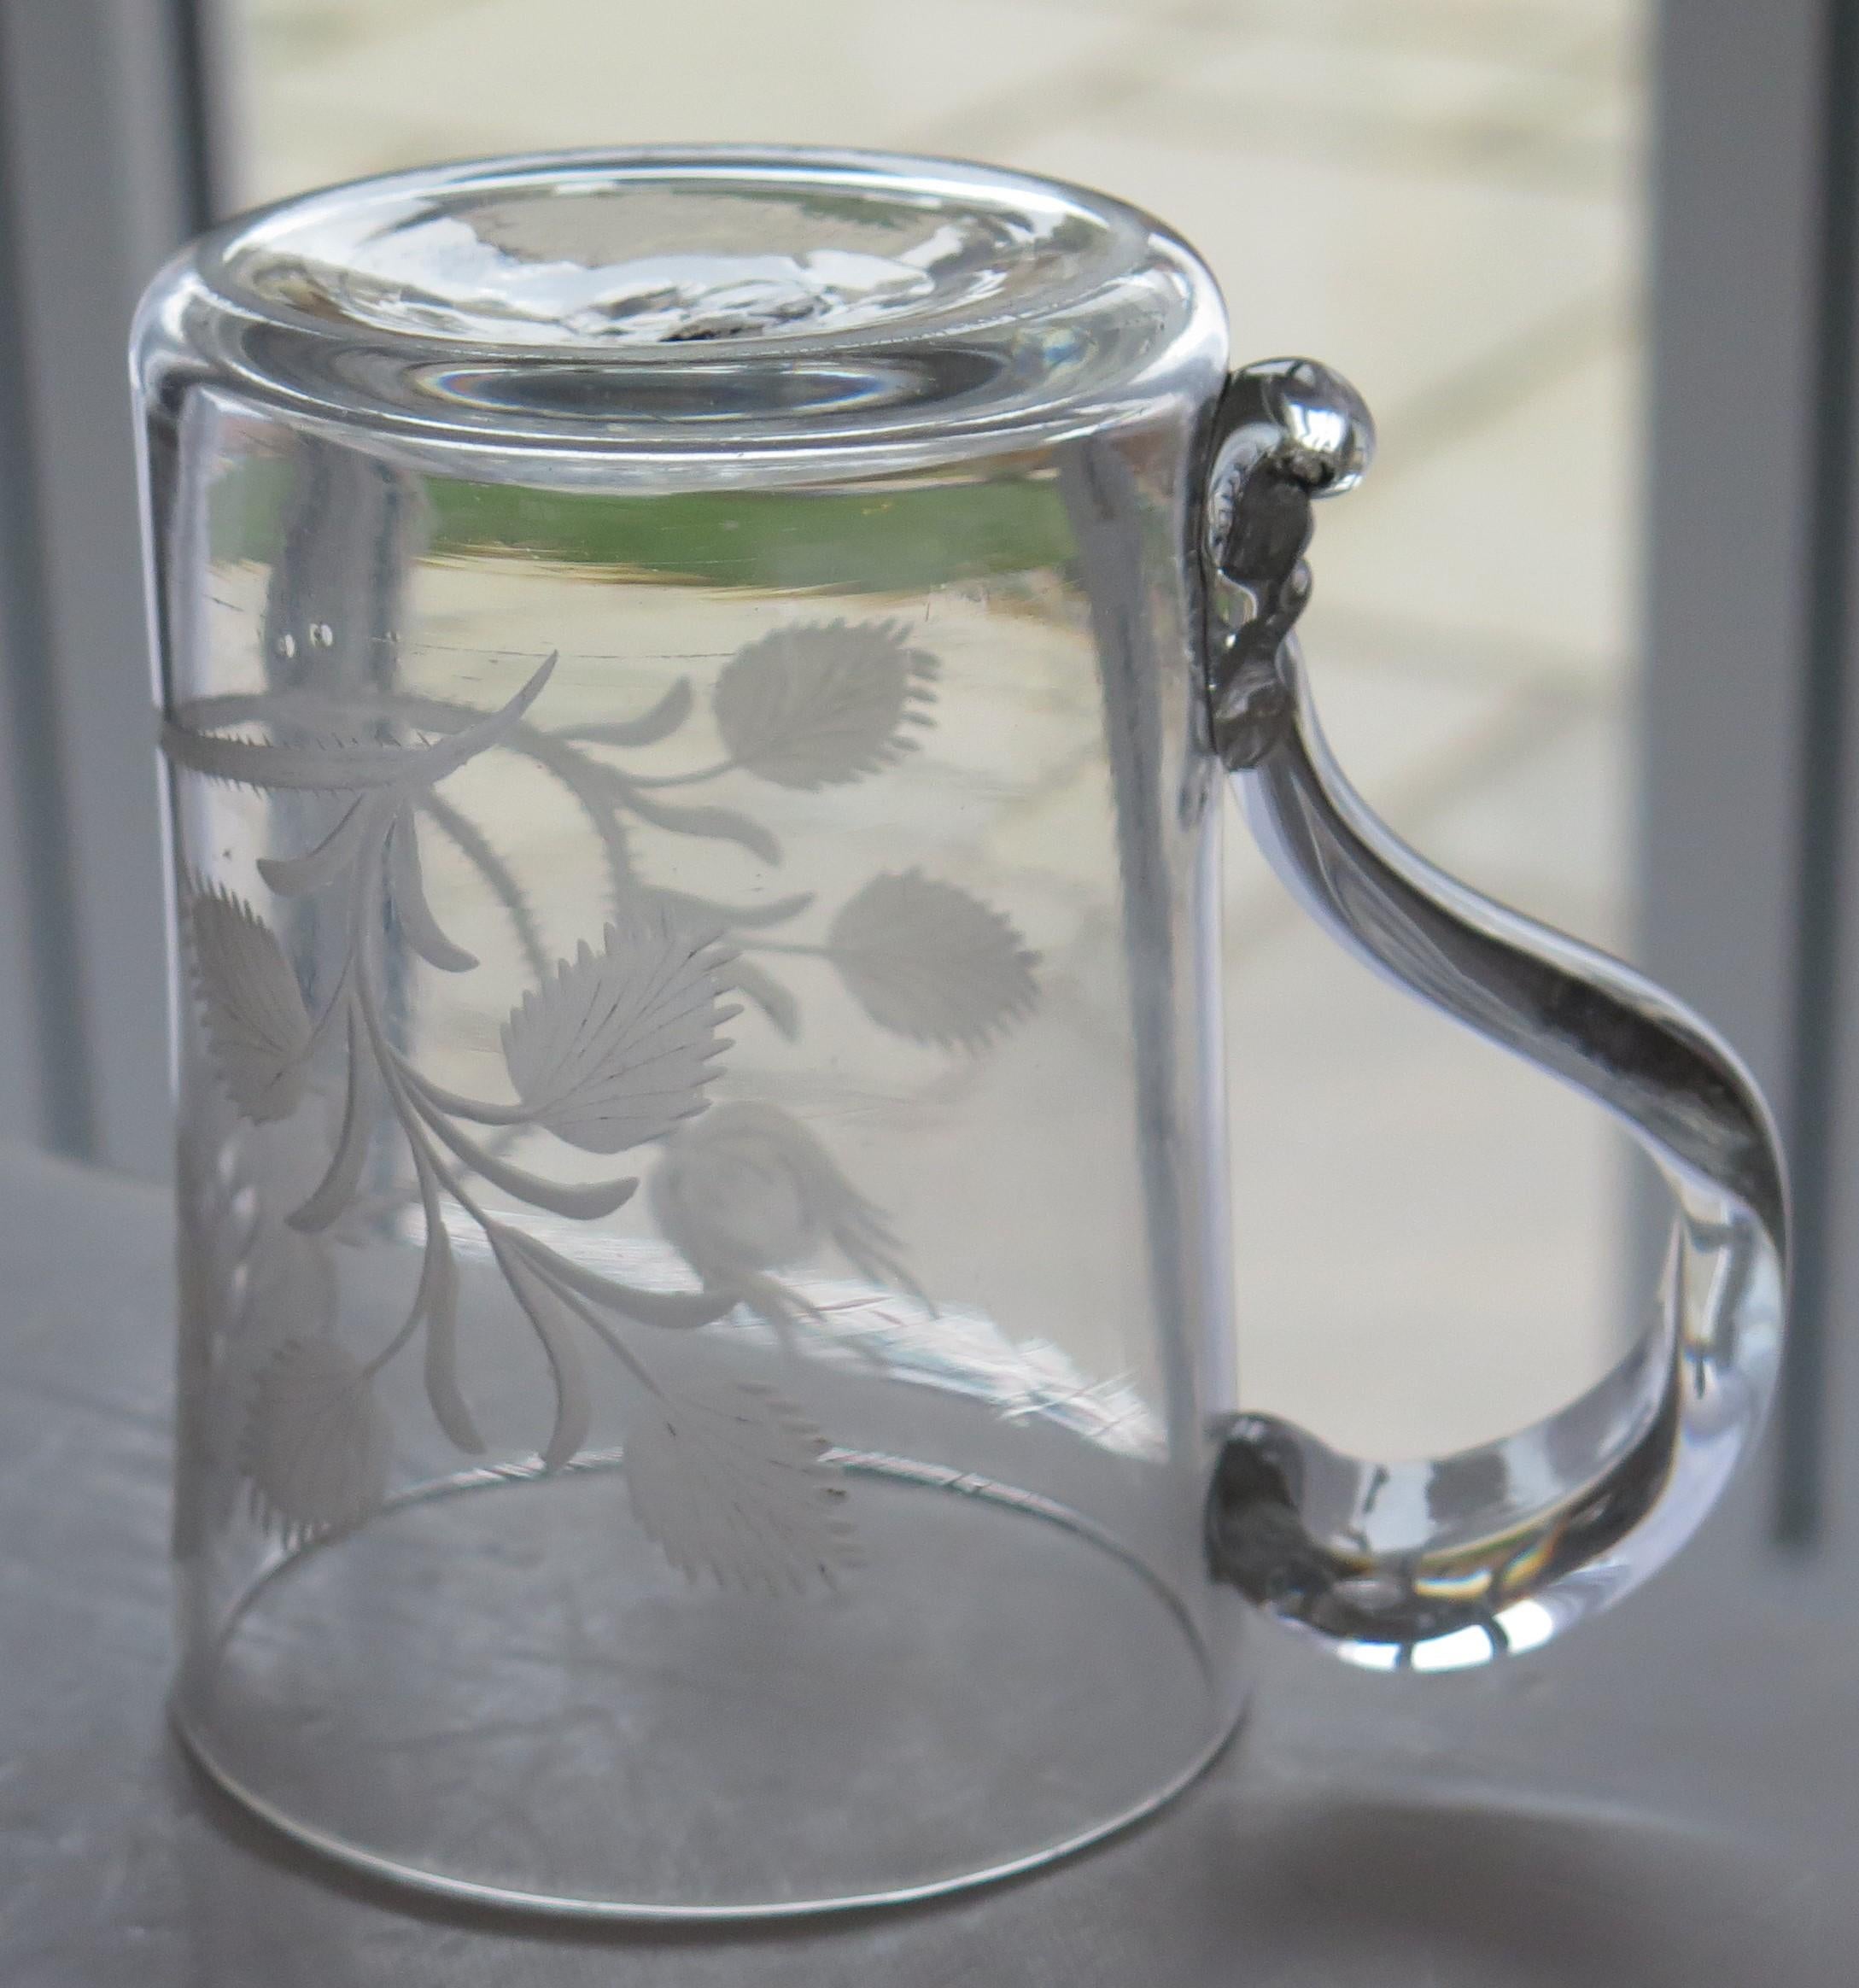 18th Century 18thC. Jacobite Glass Drinking Tankard Engraved 7-Petal Rose and bud, circa 1745